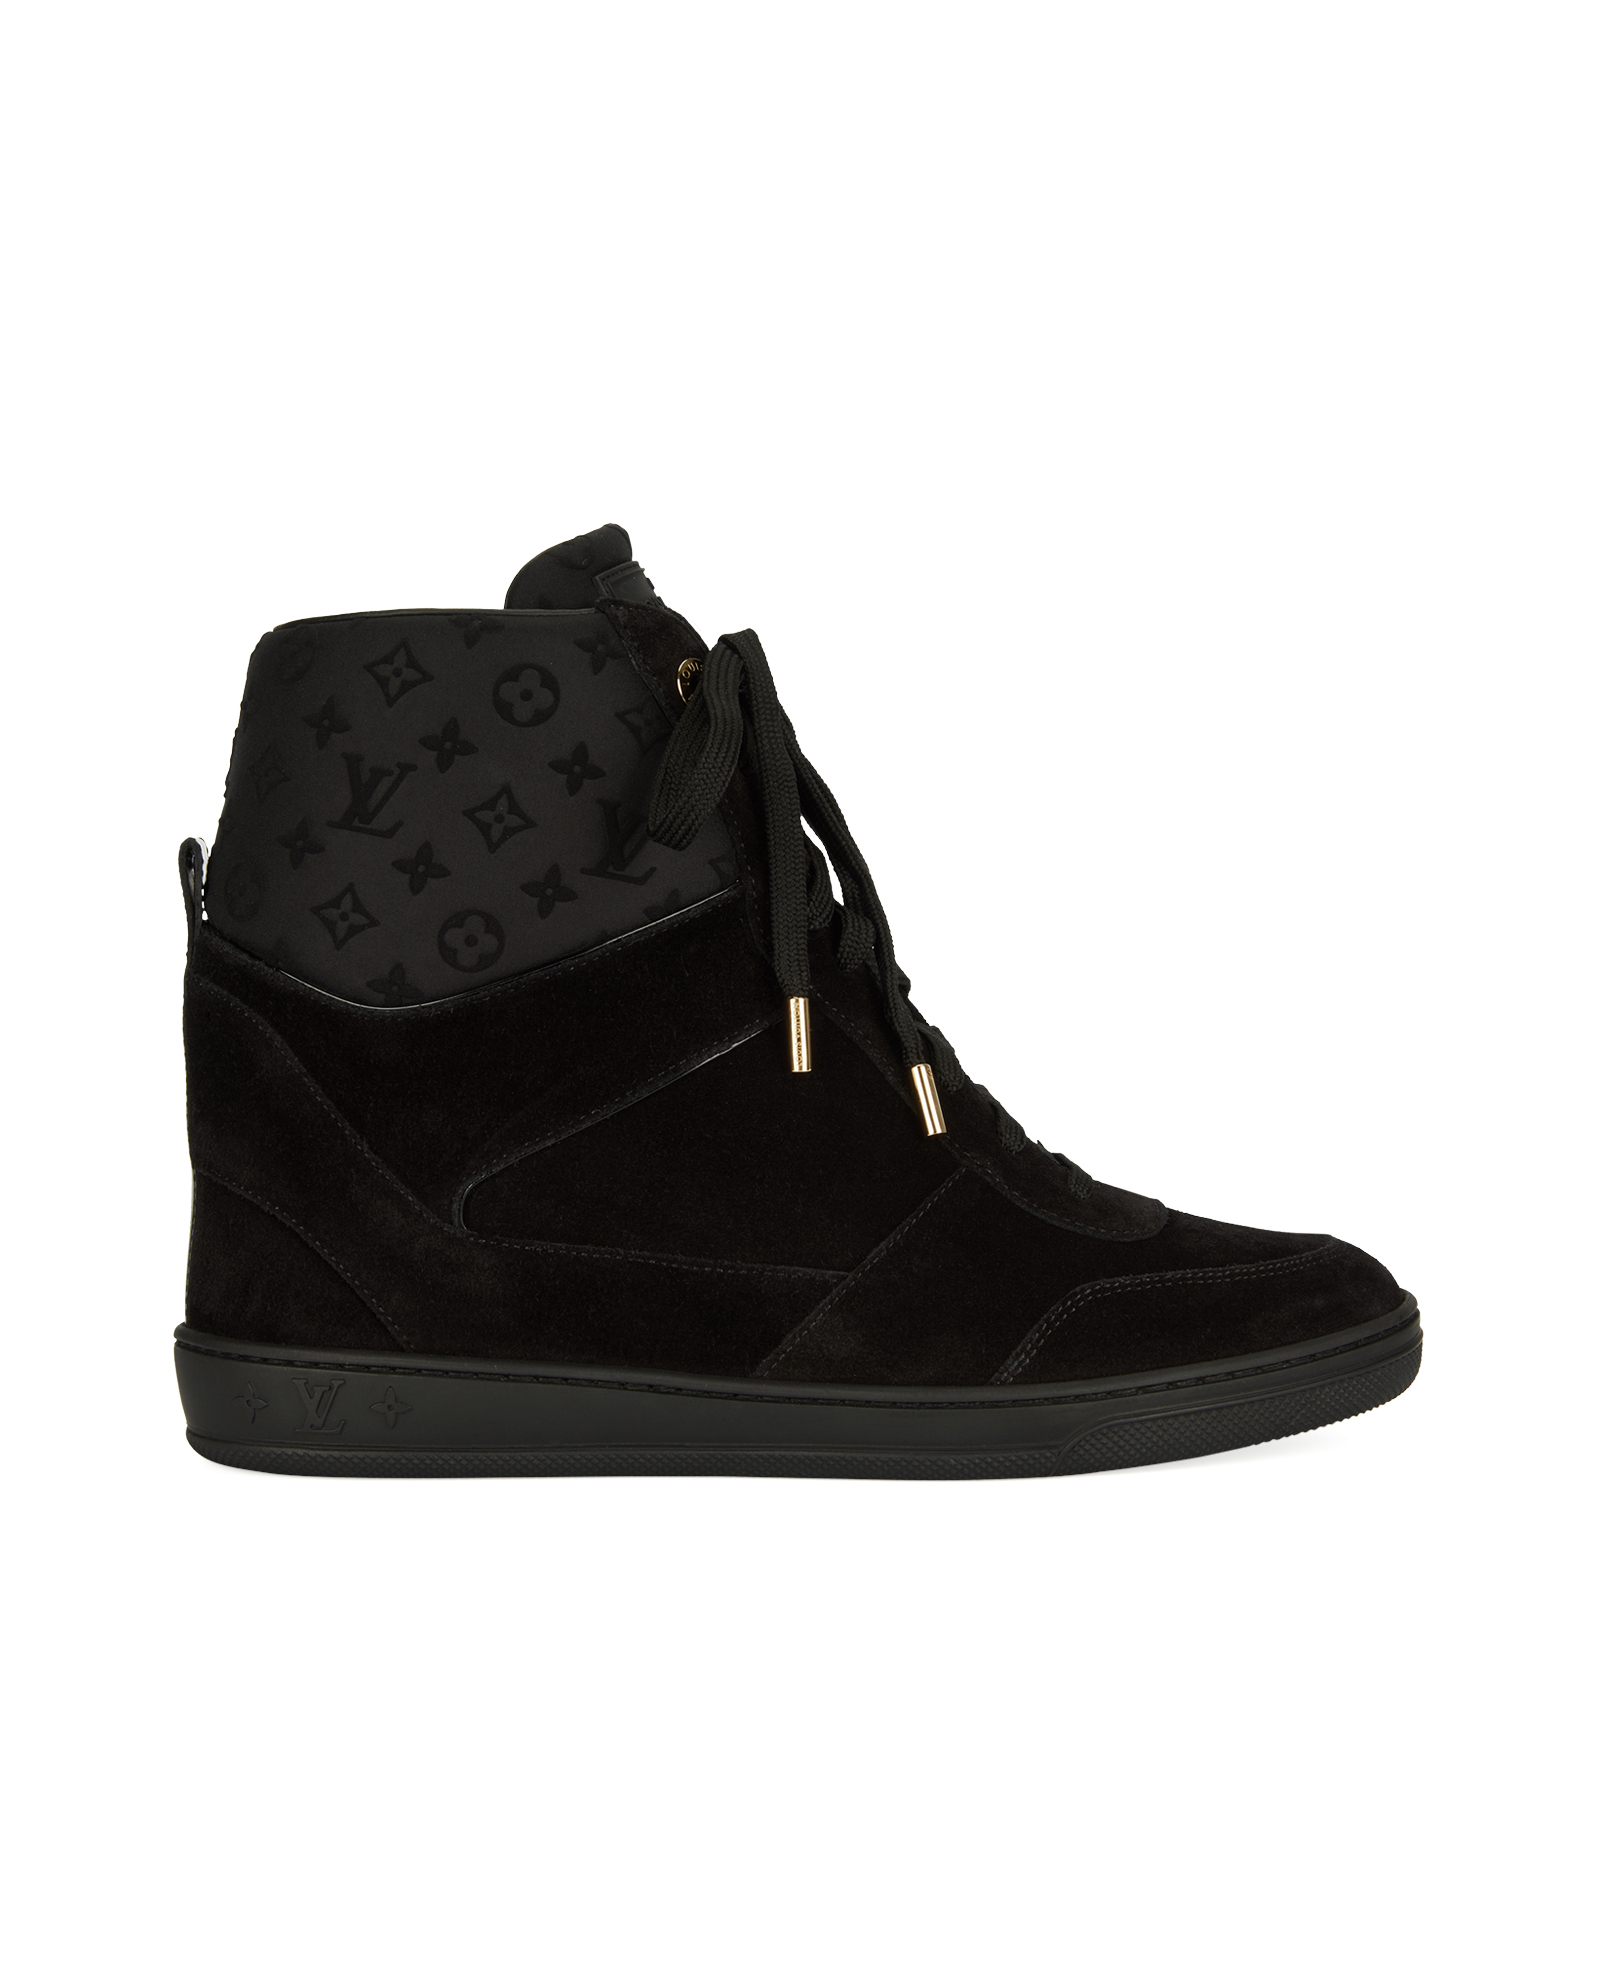 Louis Vuitton Women's Millennium Wedge Sneakers Suede with